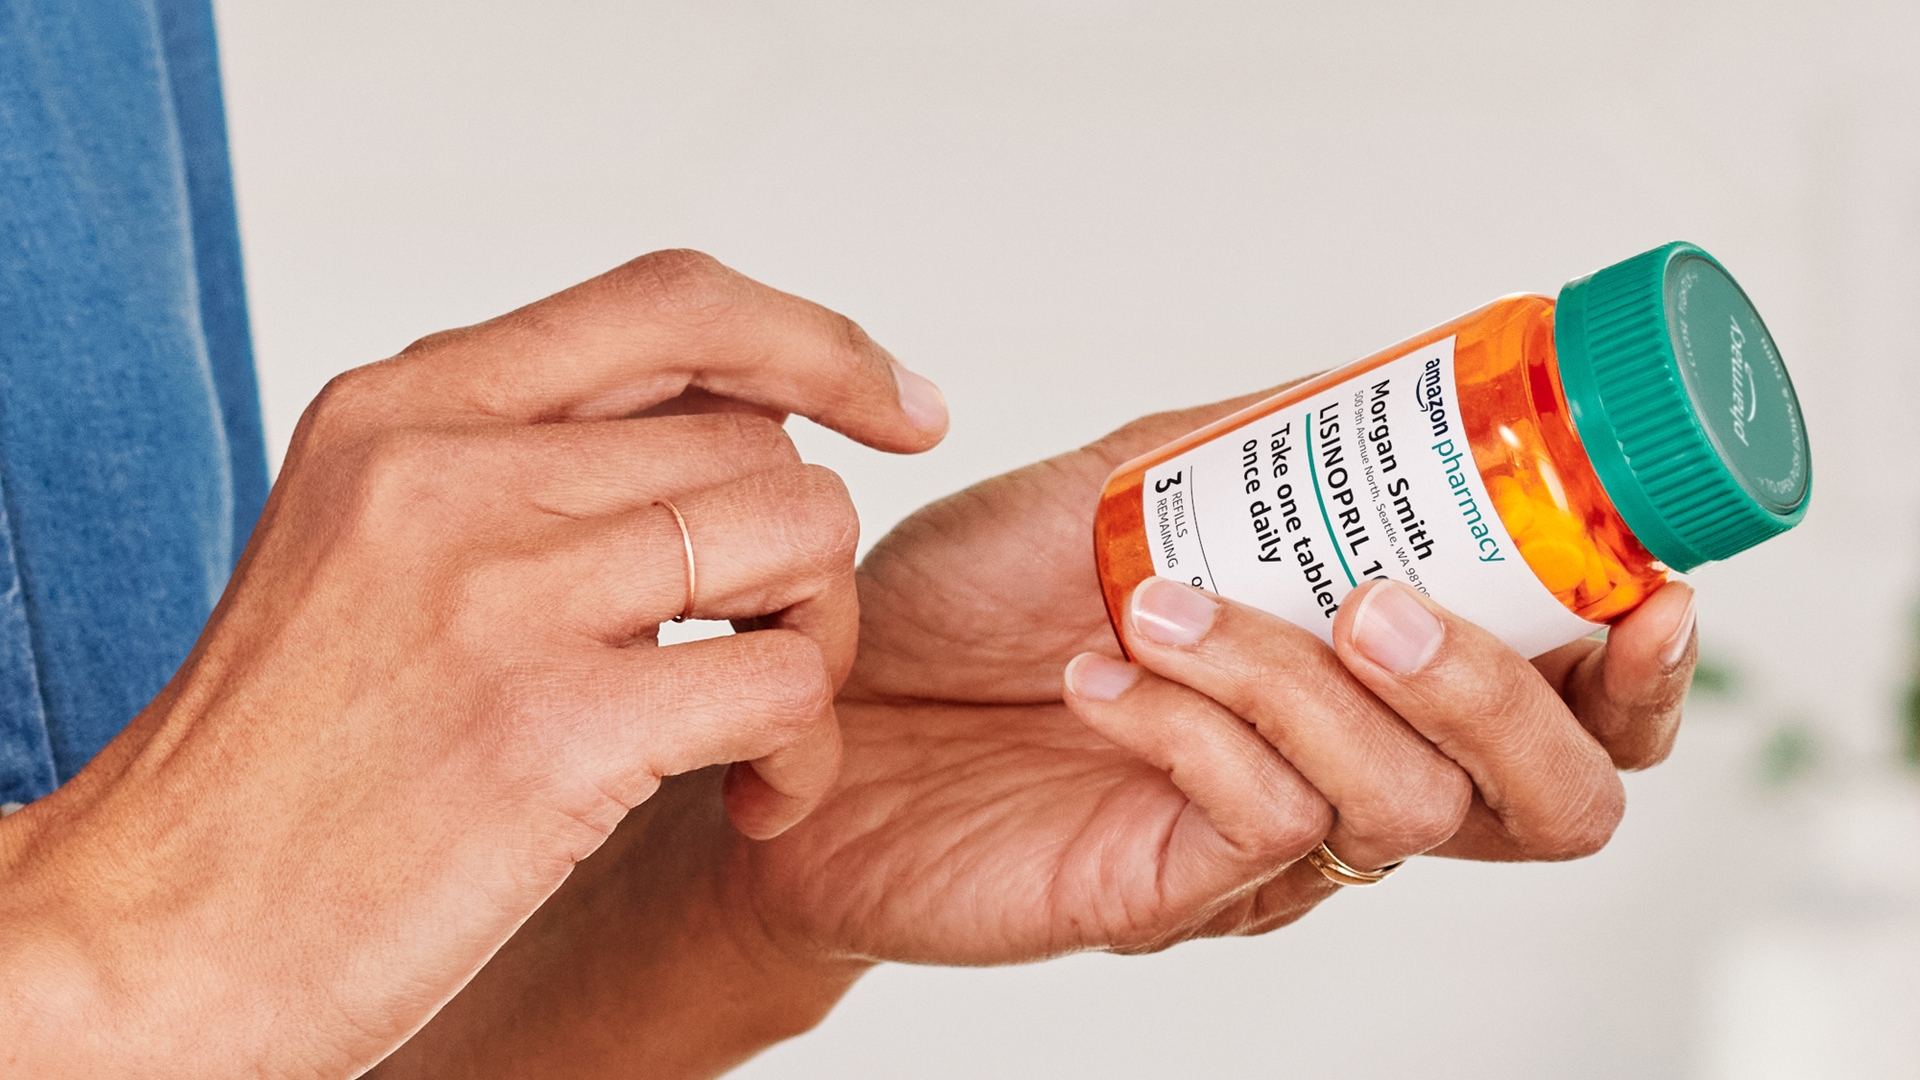 image of pair of hands one is holding a bottle of lisinopril prescribed through amazon pharmacy